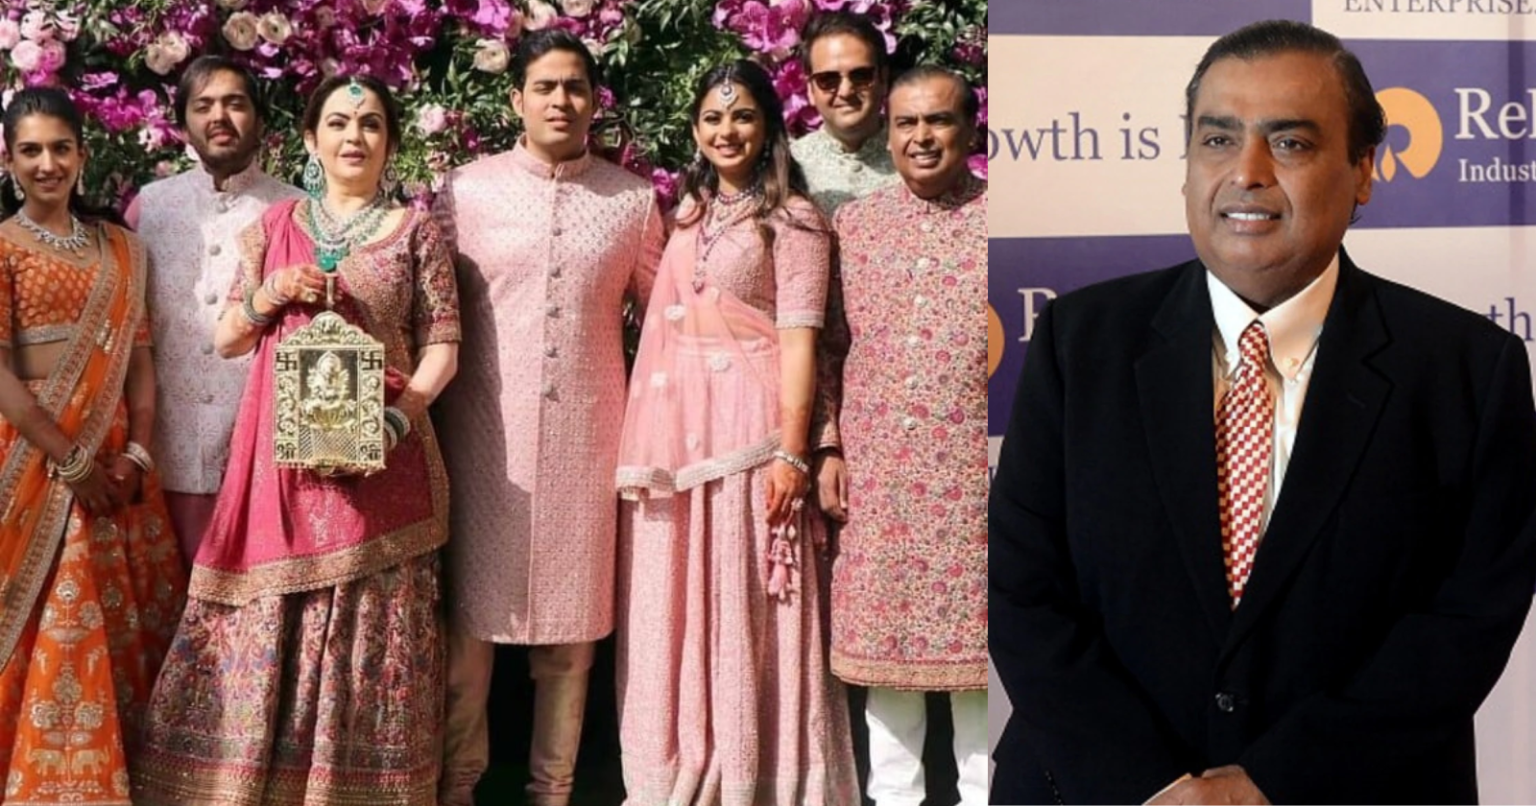 Educational Backgrounds of Ambani Family Members – A Glimpse into India’s Wealthiest Household